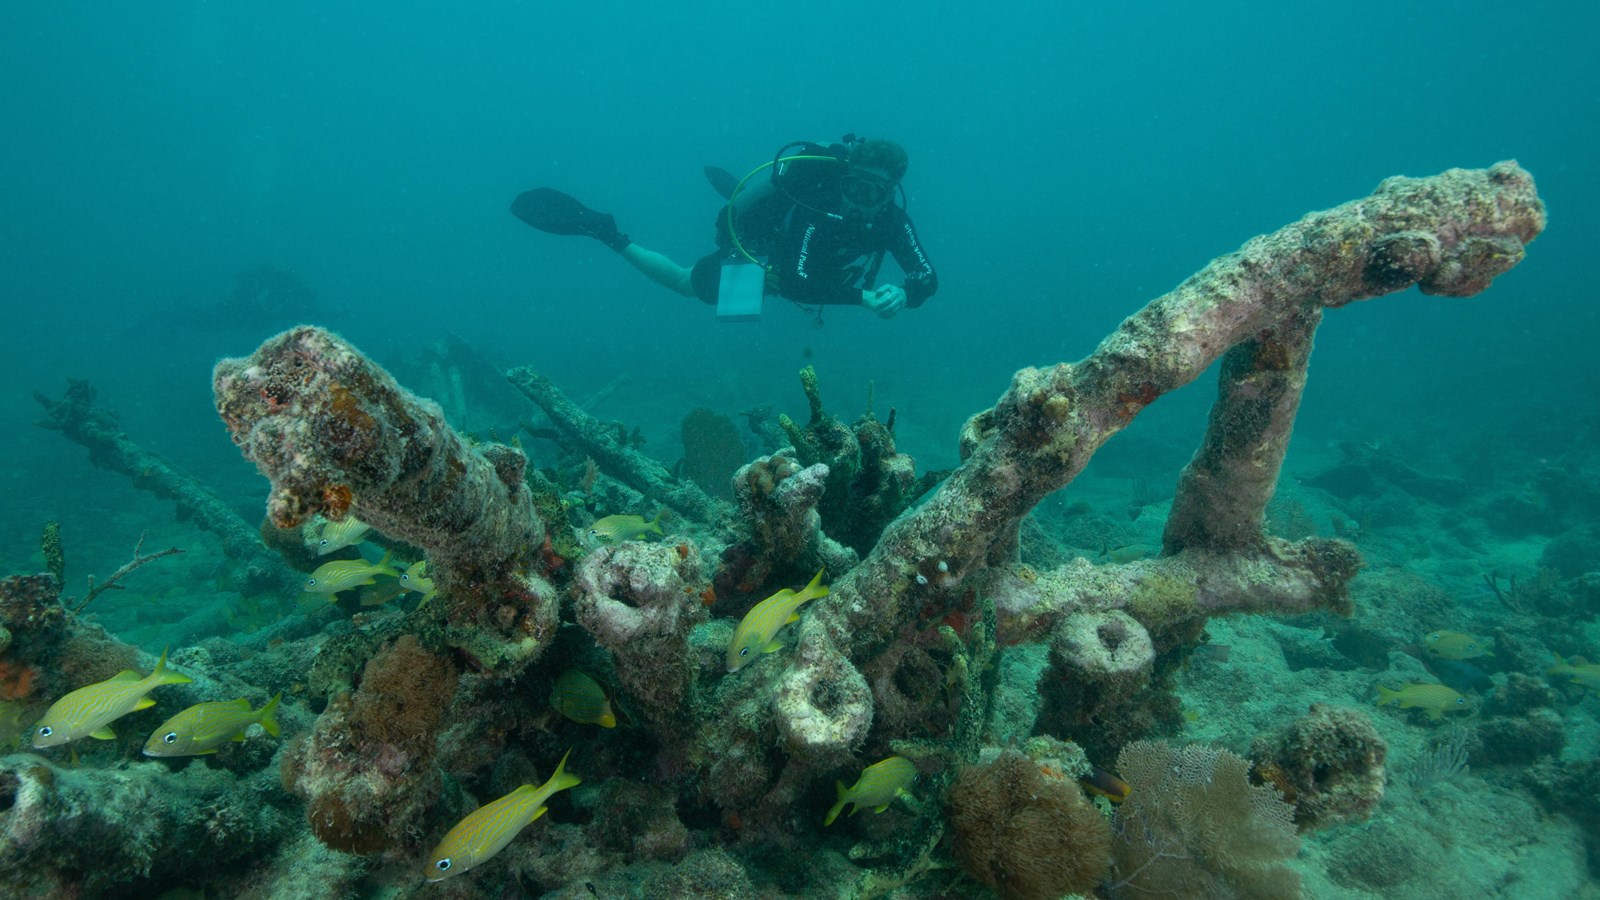 SCUBA diver floating above a shipwreck nestled on the sandy sea floor 